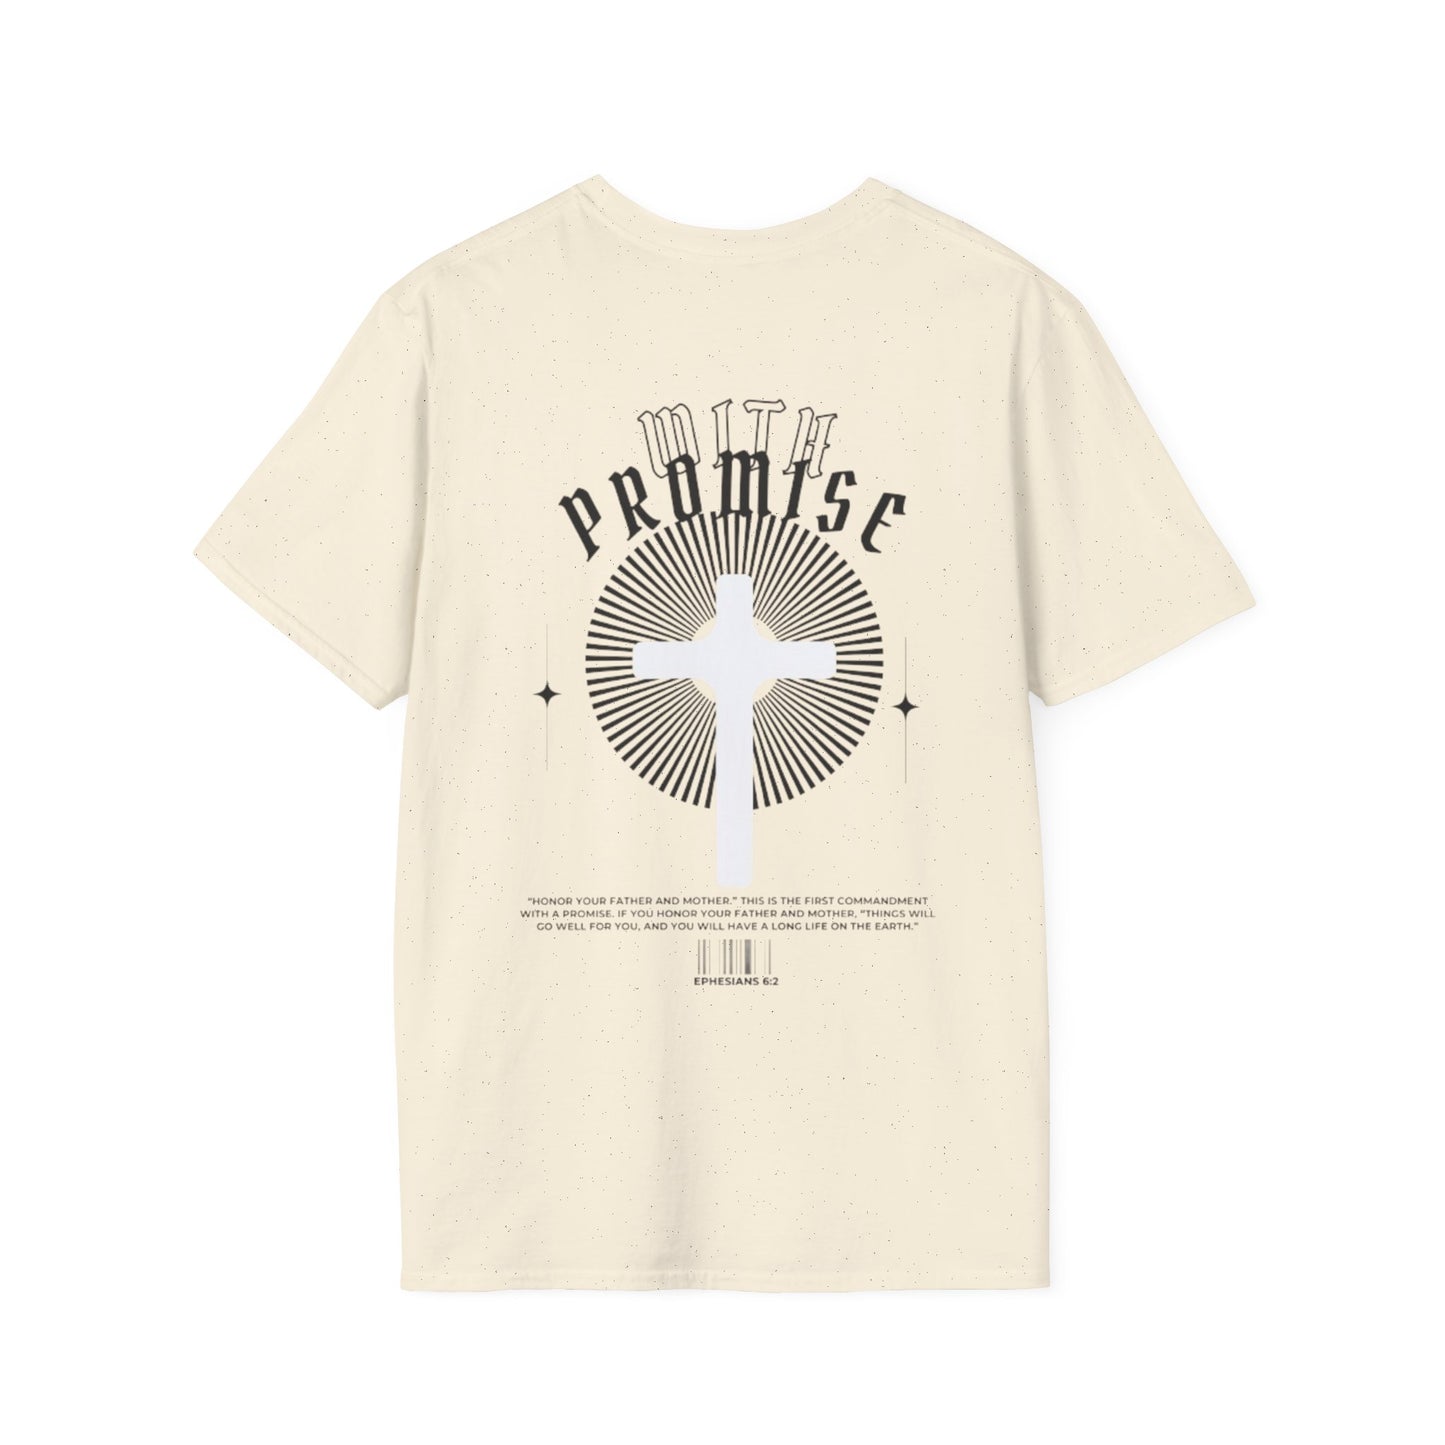 With Promise - Unisex Softstyle T-Shirt